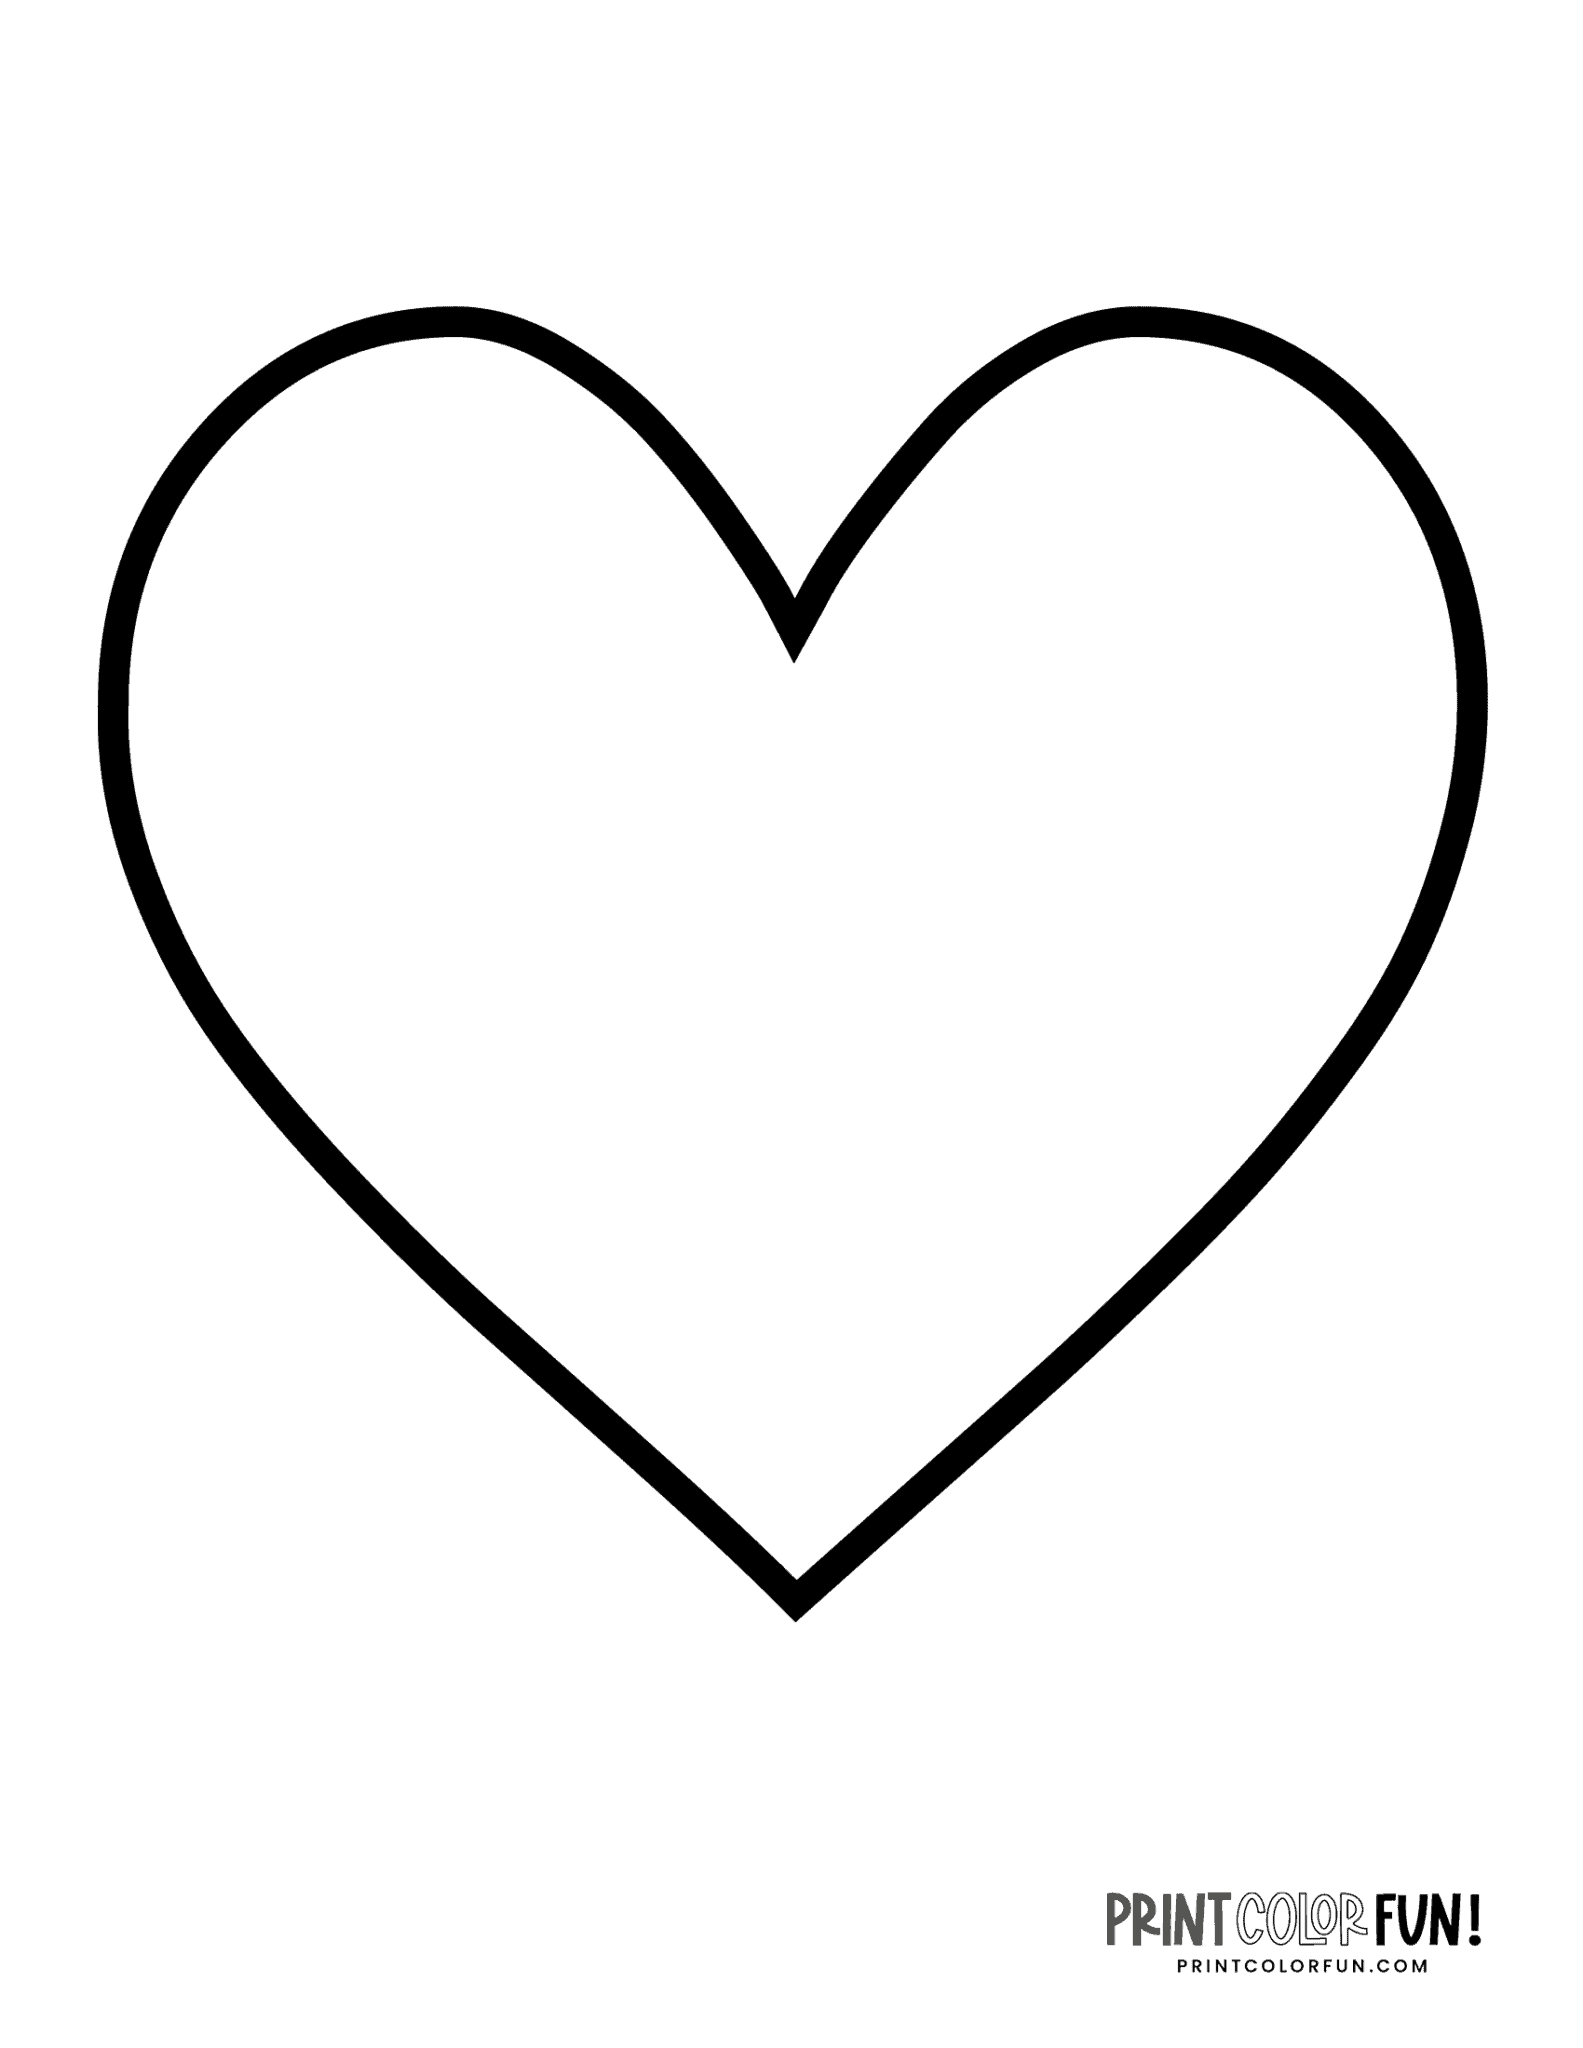 Blank heart shape coloring pages & crafty printables - Print Color Fun!